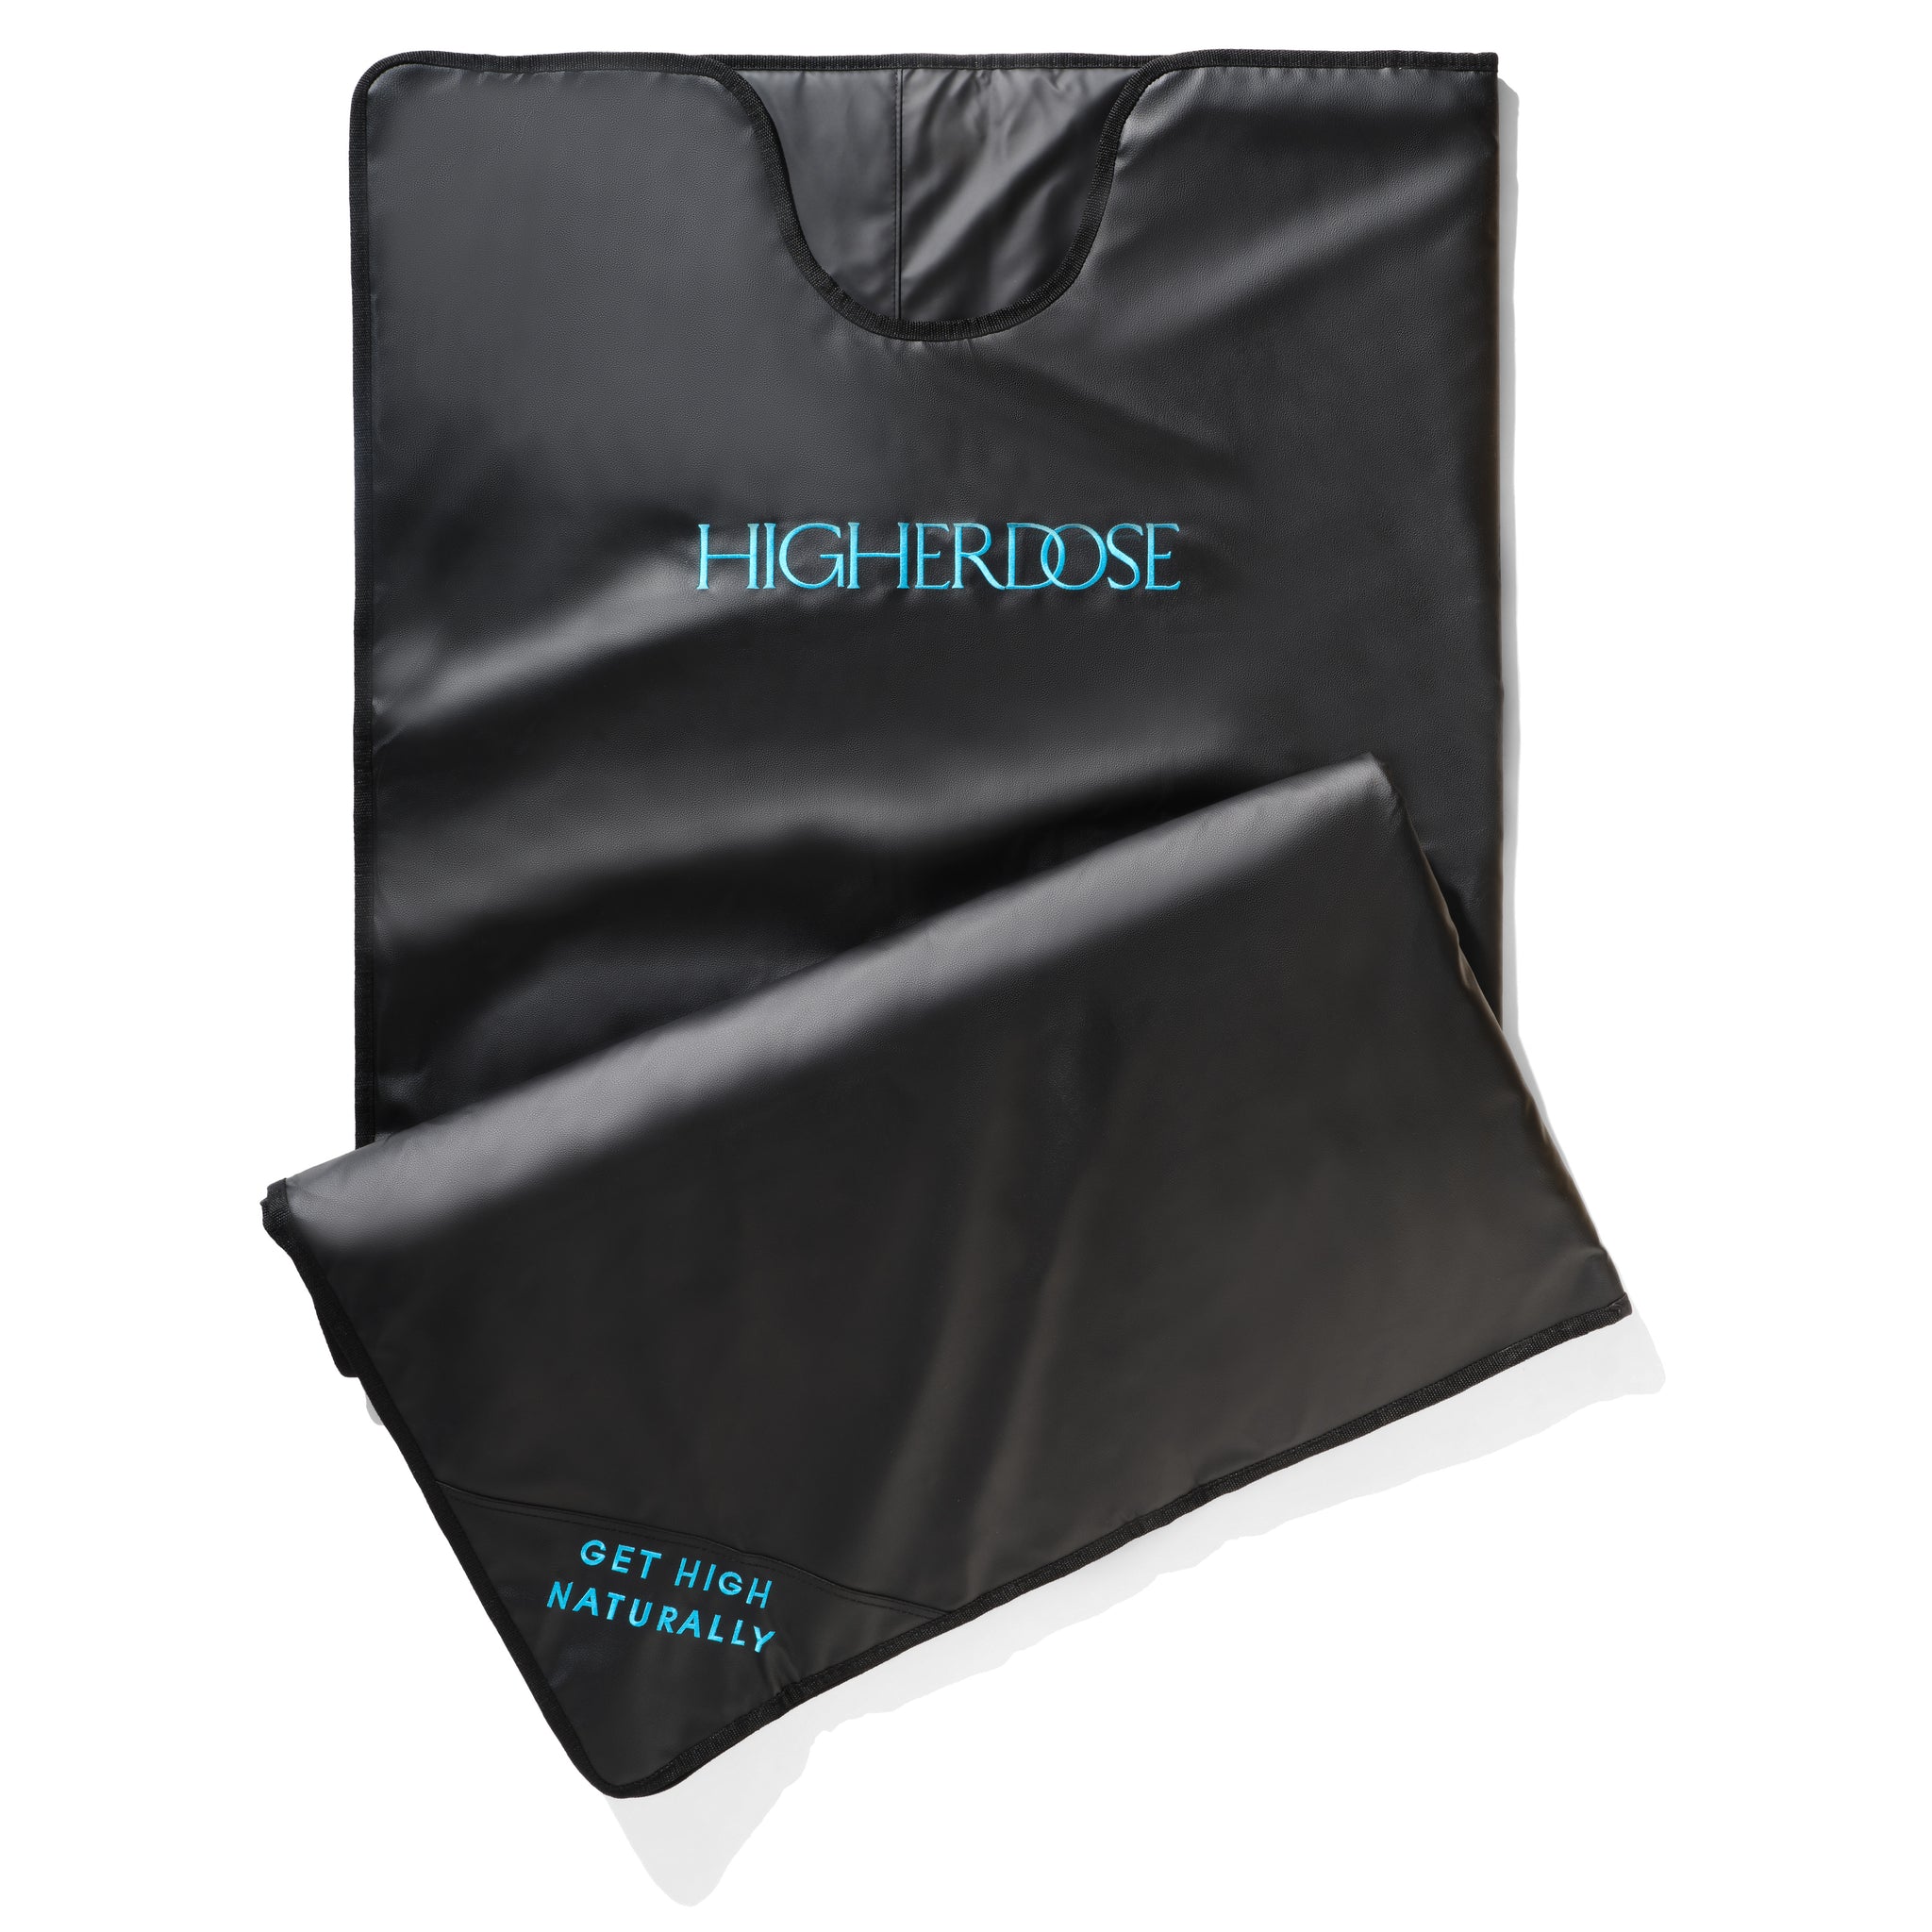 HigherDose Infrared Mat Review - Why We Love The HigherDose